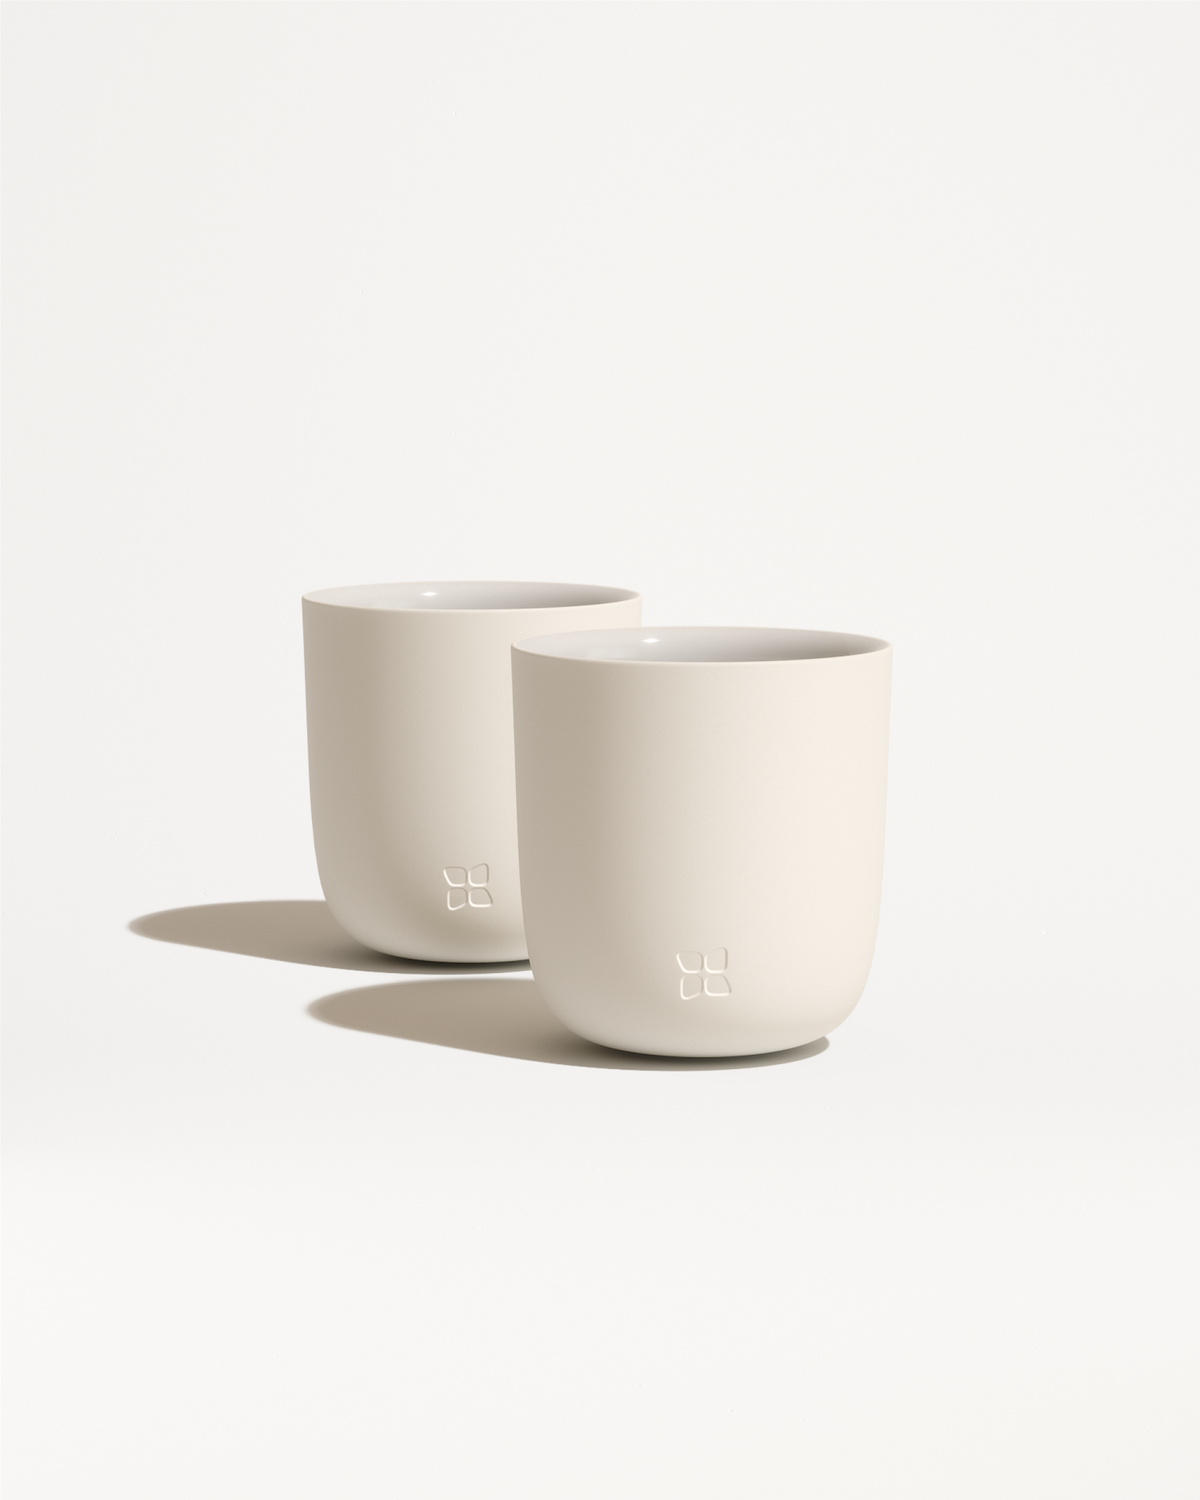 Double-walled Porcelain Cups